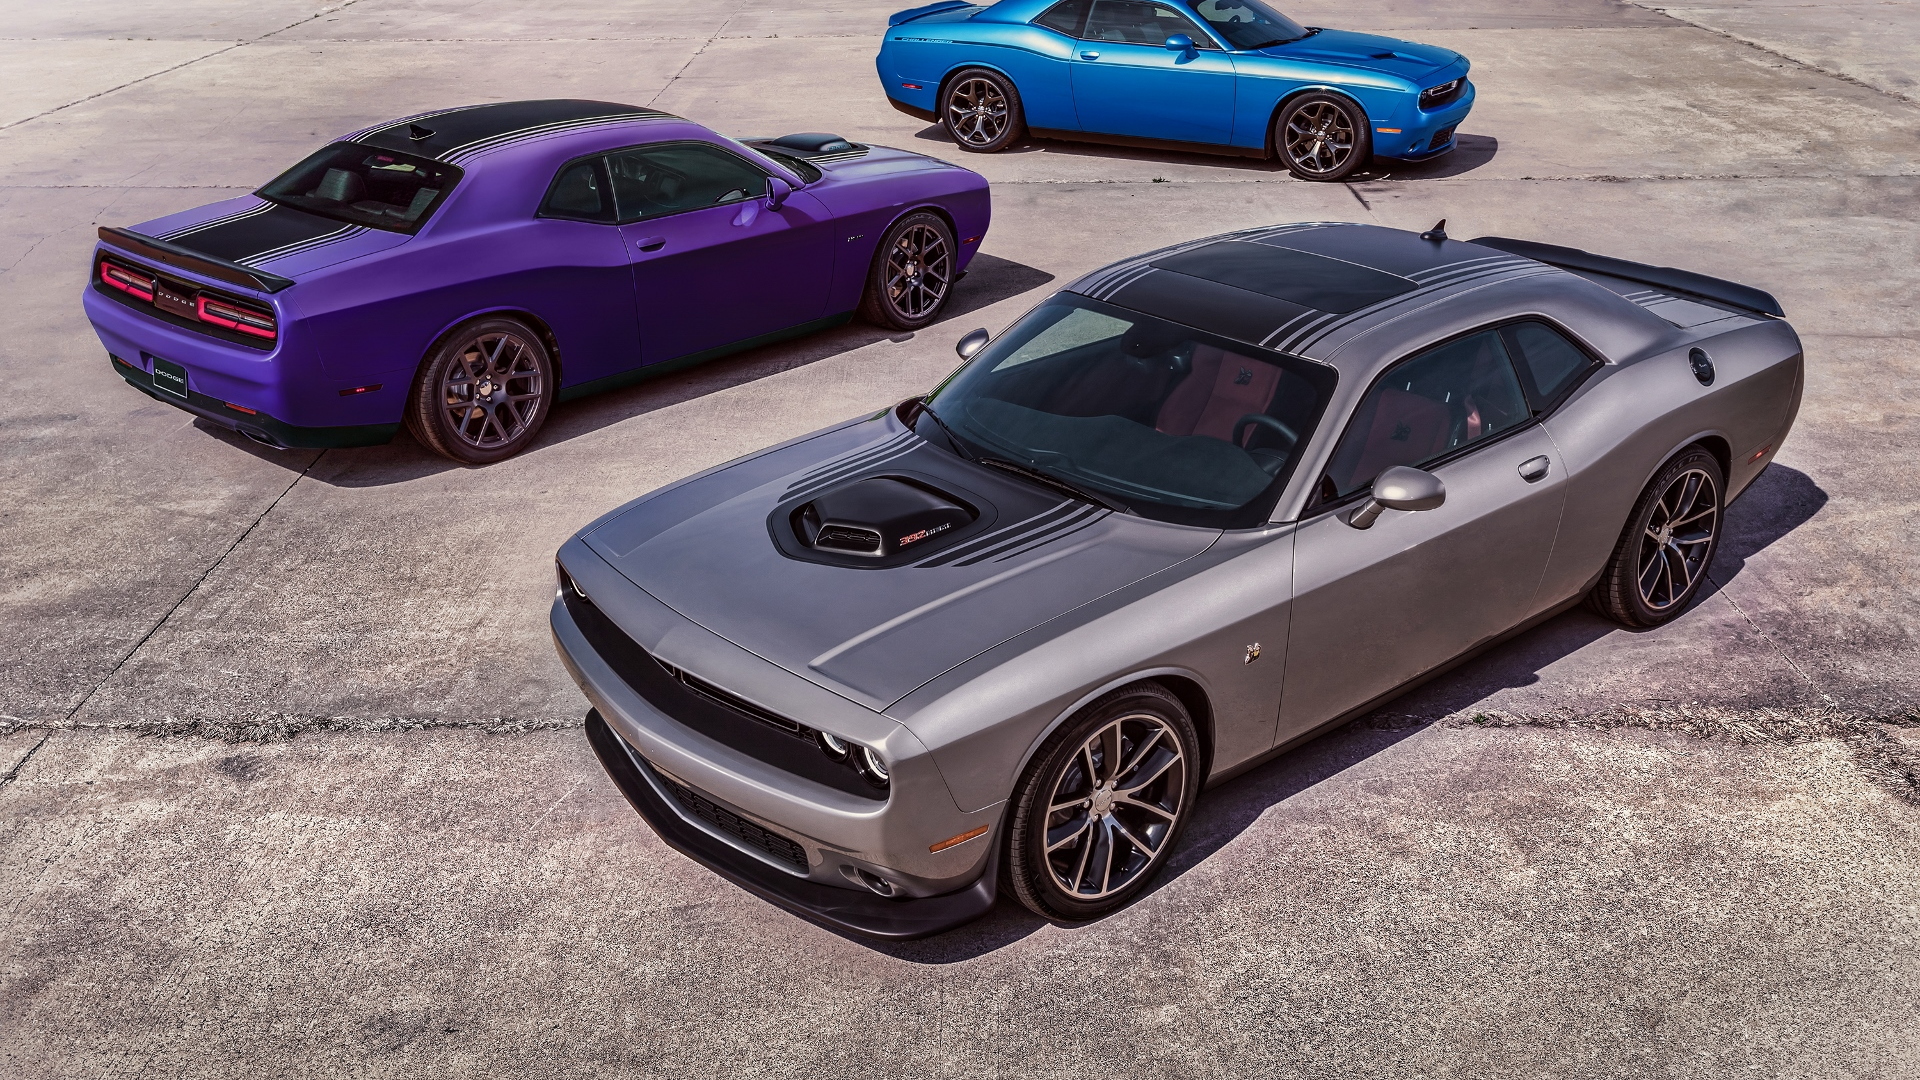 2016 Dodge Charger and Challenger Plum Crazy